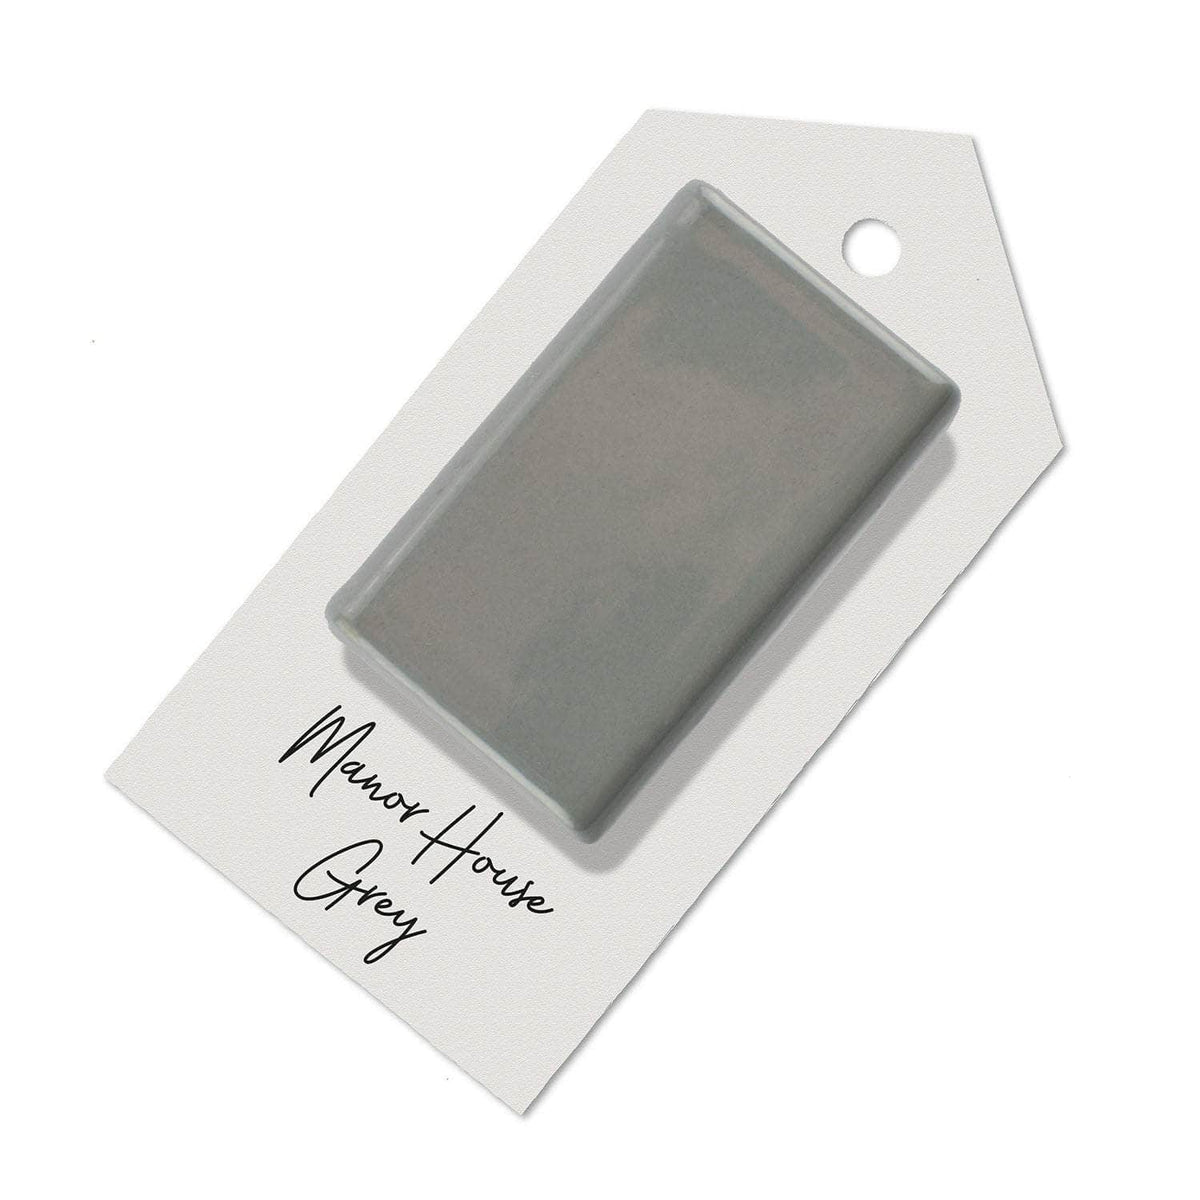 Manor House Grey sample for Aga range cooker re-enamelling &amp; reconditioned cookers